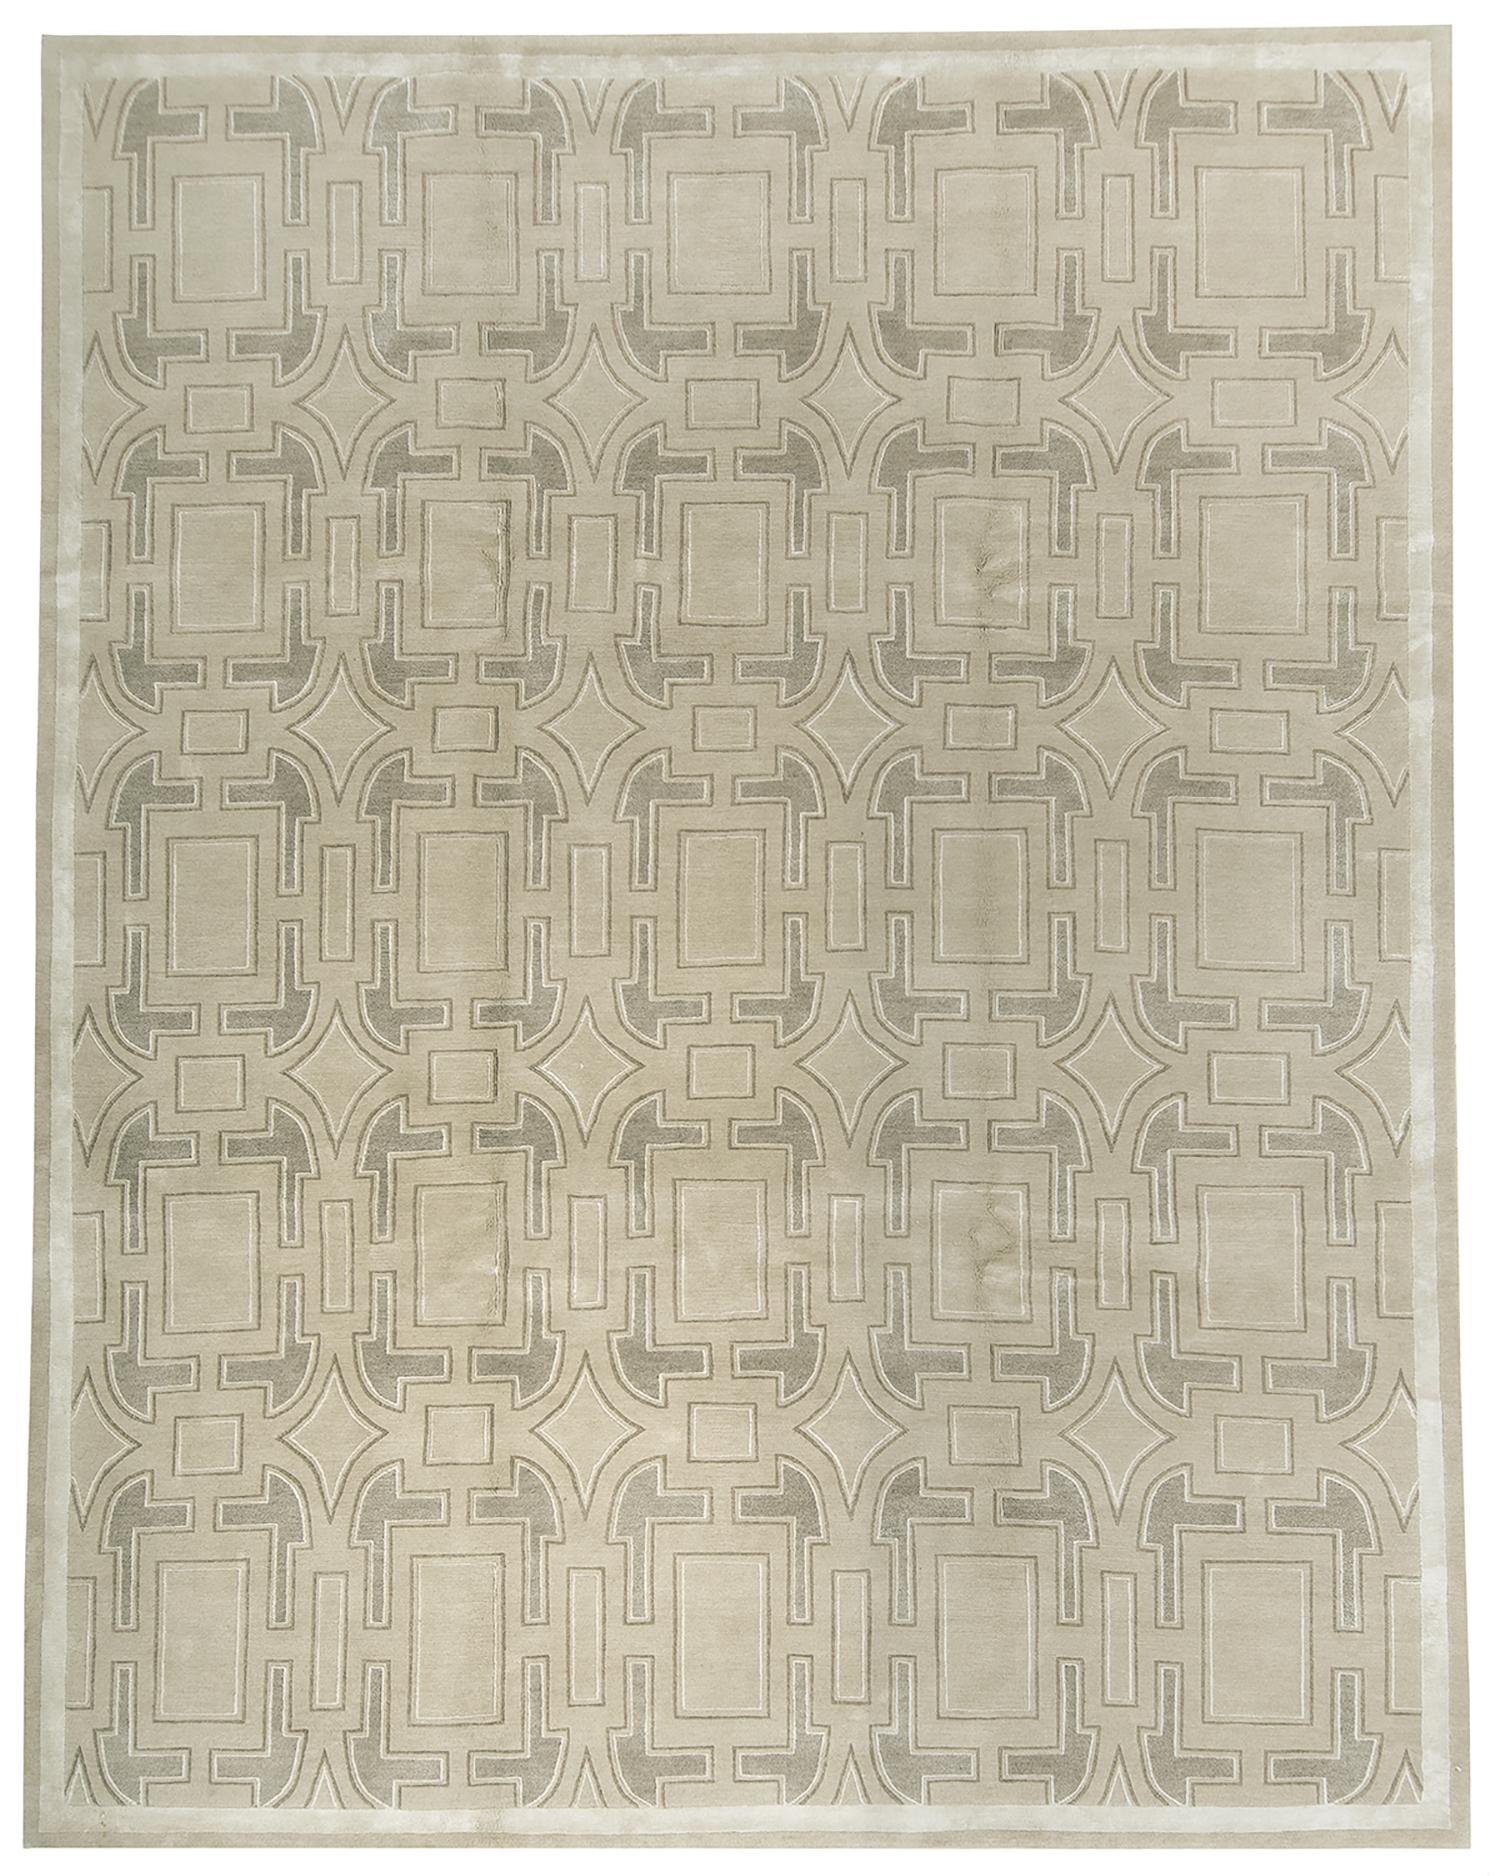 American Coverlet (96587)image